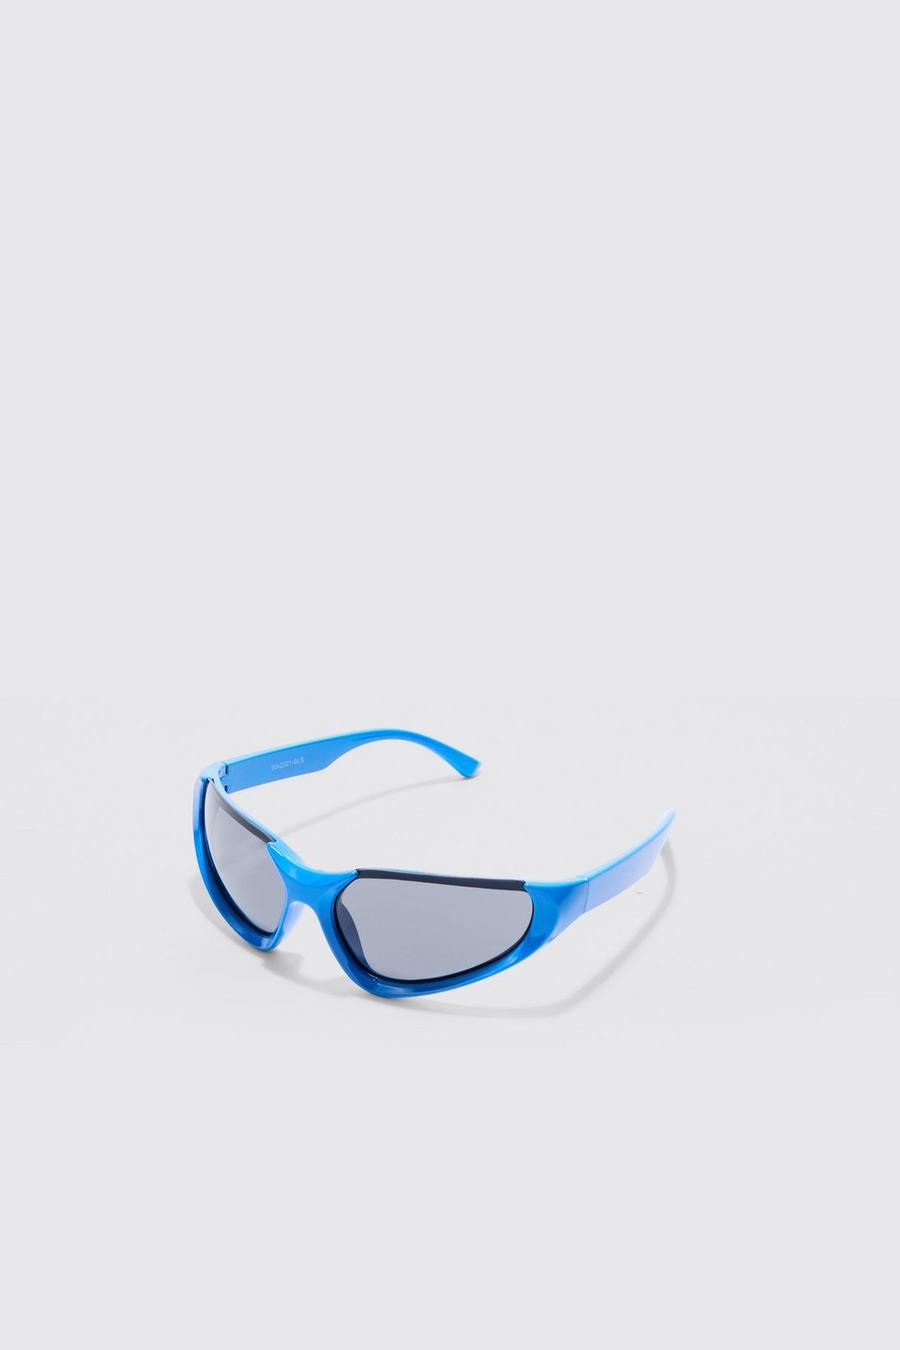 Blue the ® GU00020-D Sunglasses are here to enhance your cool look